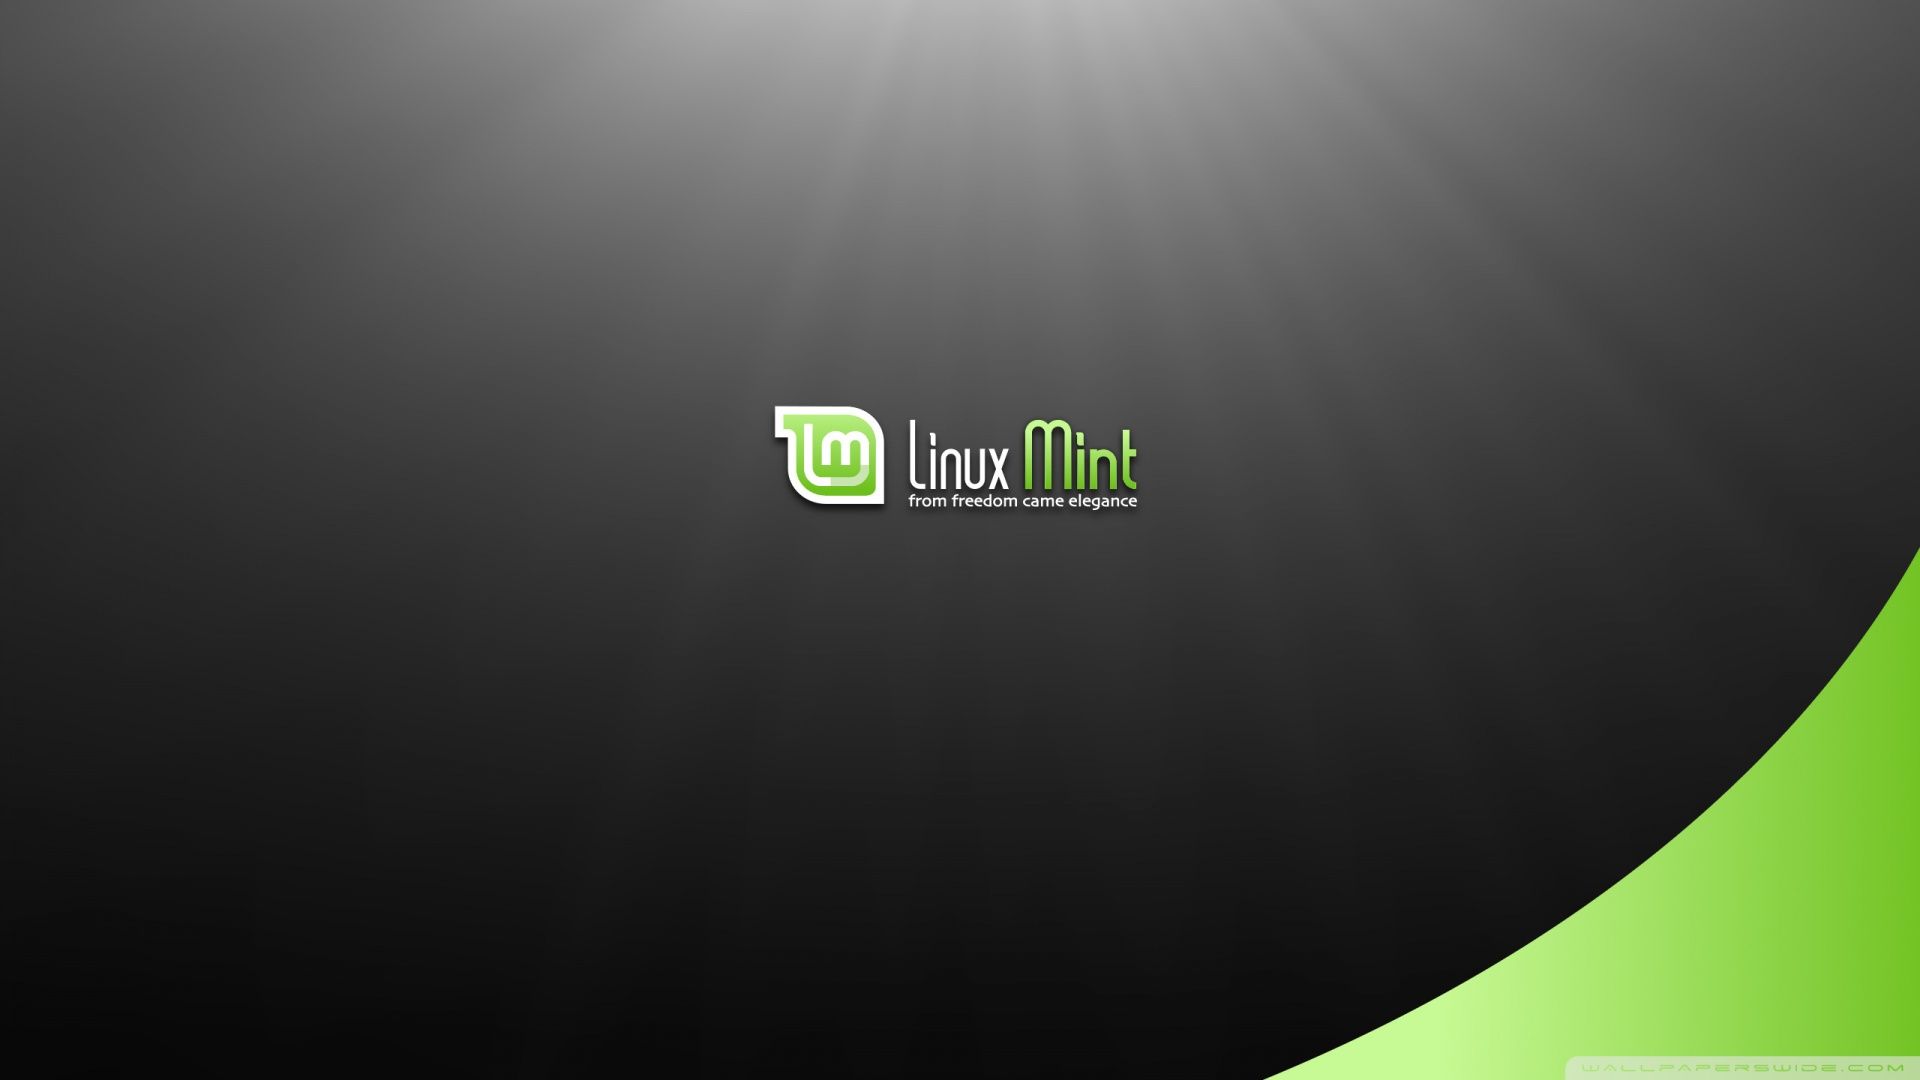 Dual Booting: Linux Mint 15 "Olivia" Cinnamon Edition Installed